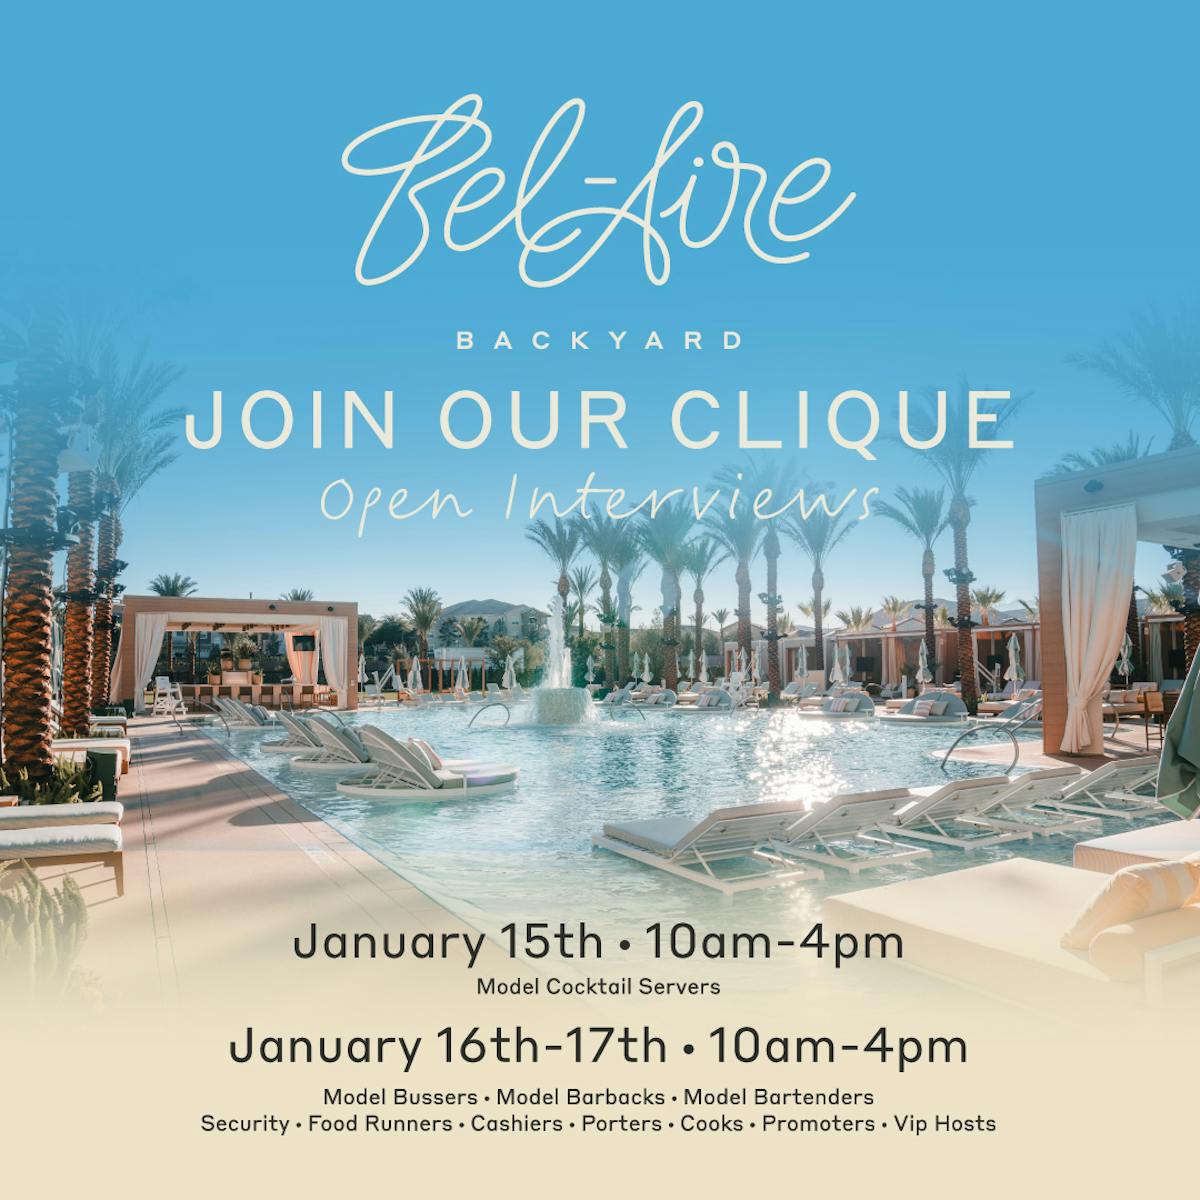 Join our Clique at Bel-Aire Backyard a Las Vegas pool bar